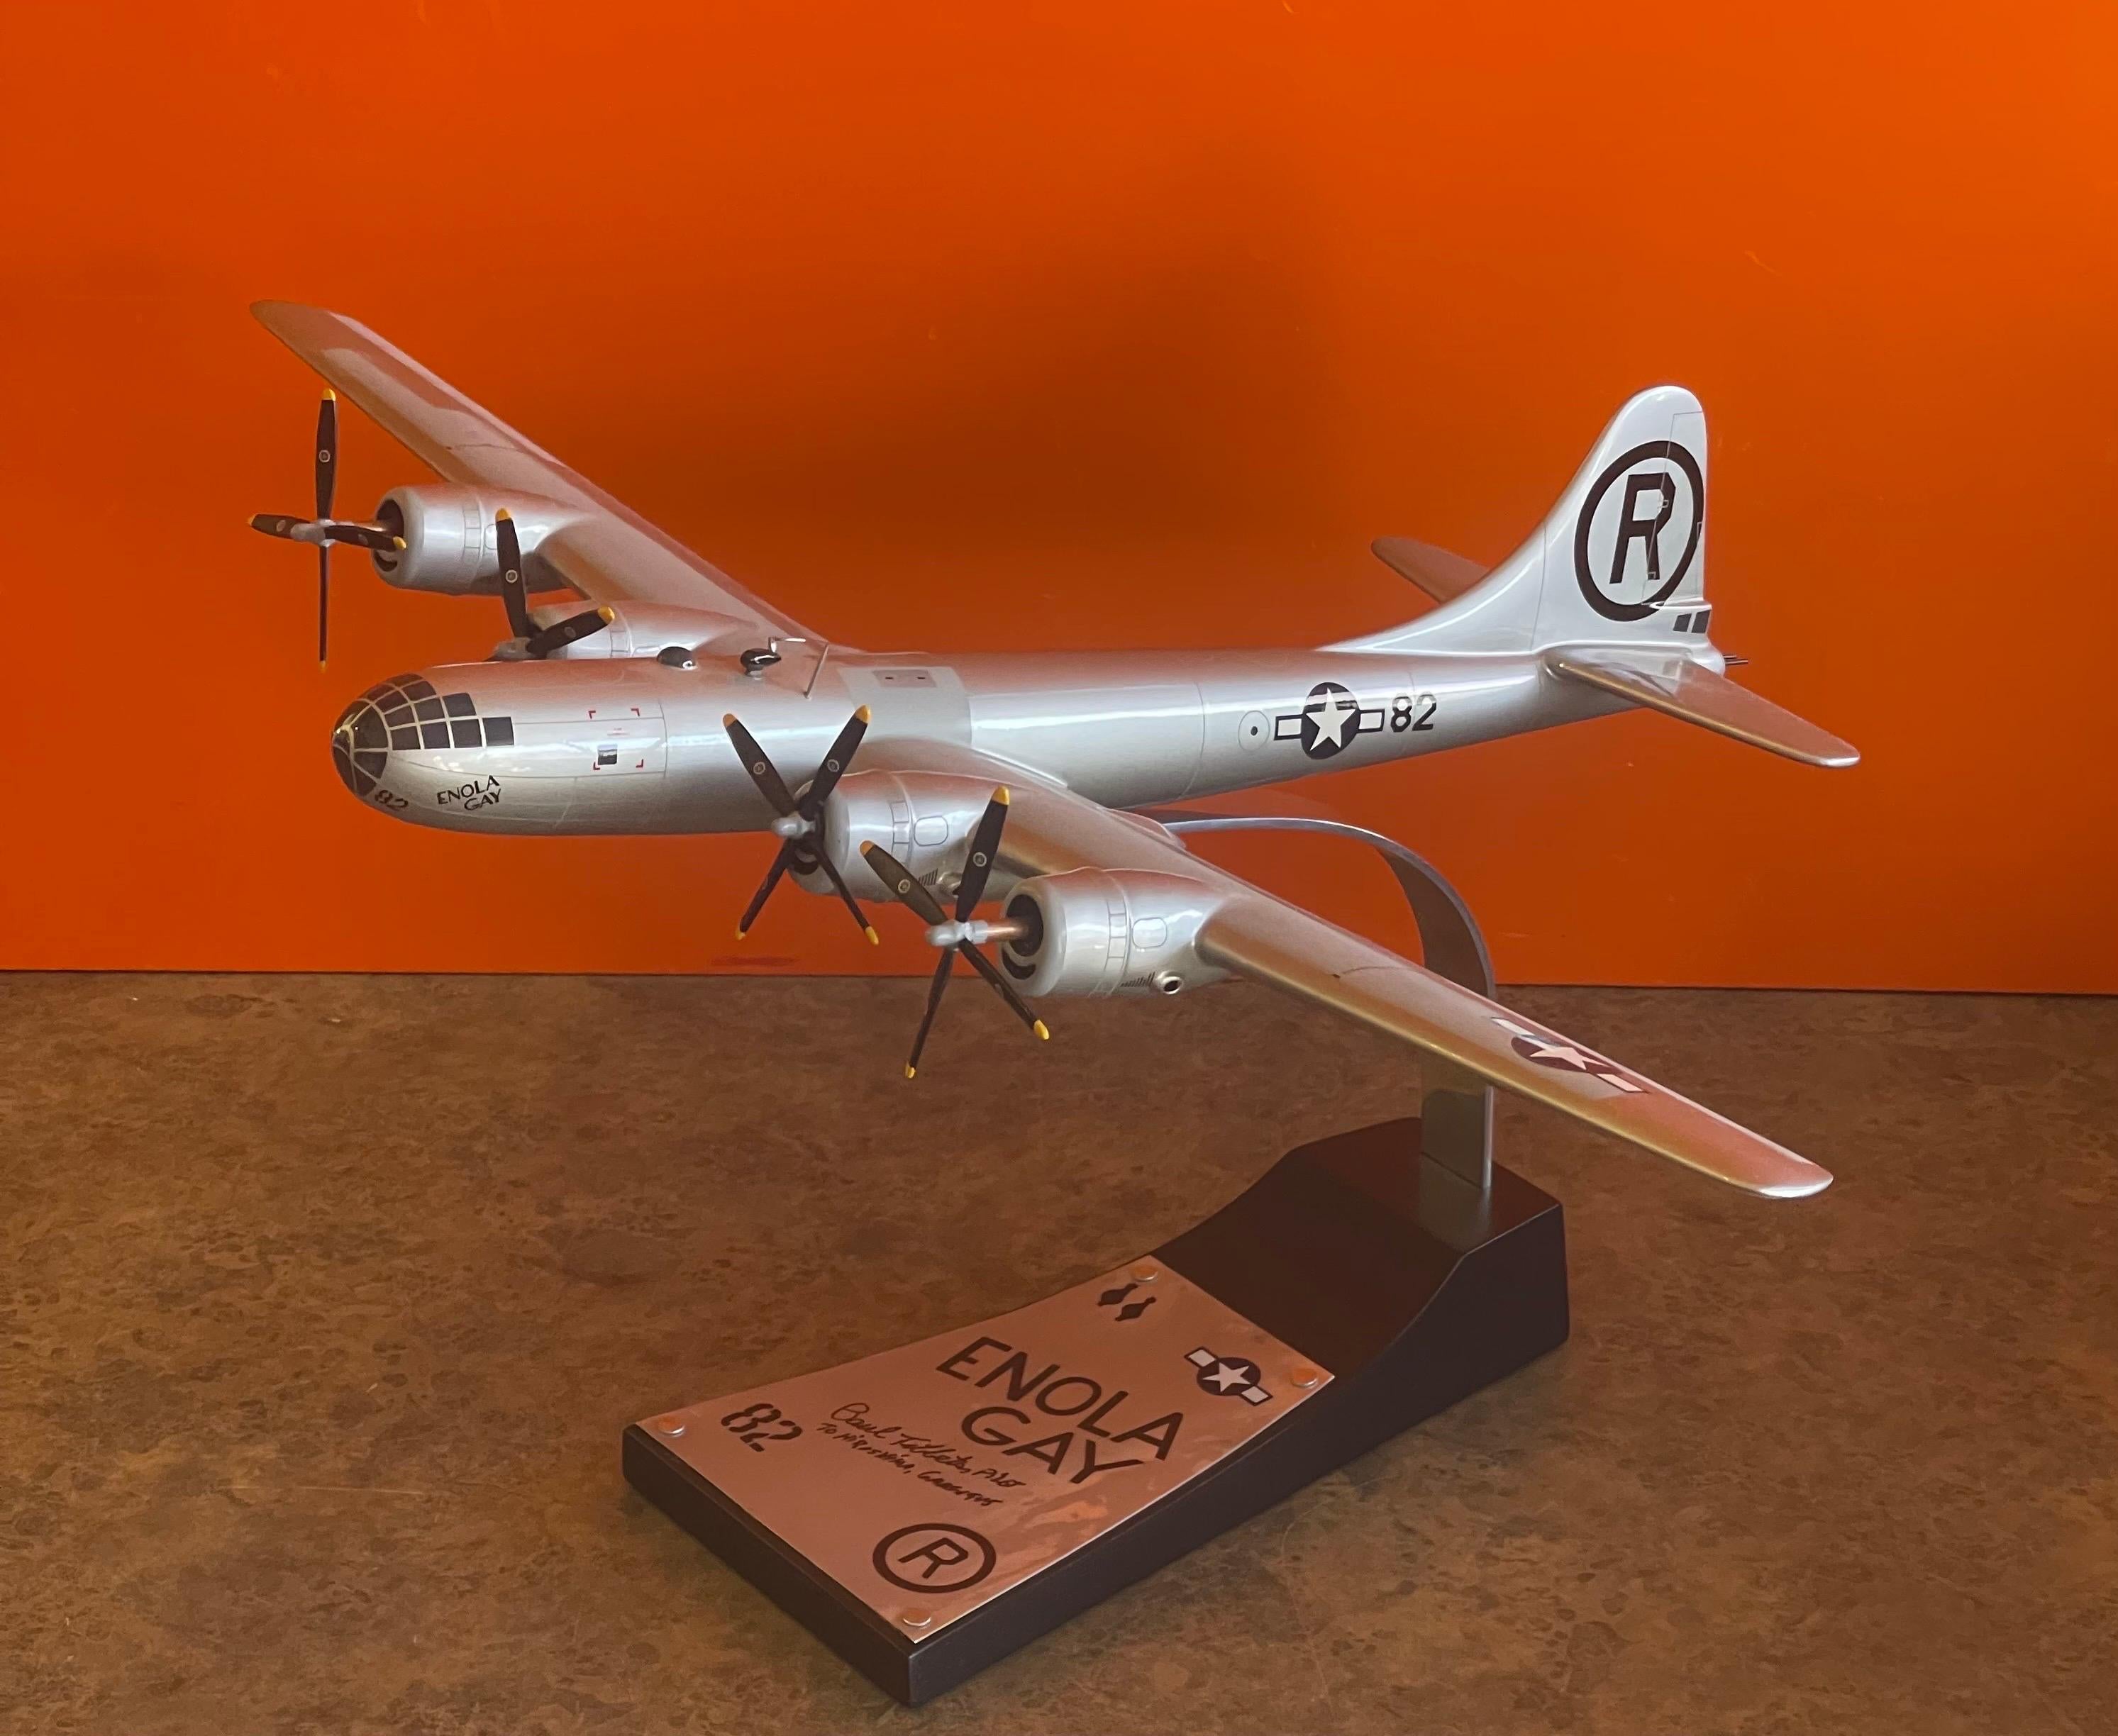 Superbly detailed Enola Gay B-29 Boeing super fortress bomber model signed by pilot, Paul Tibbetts, circa 2000s. The Enola Gay was named after Tibbets mother, Enola Gay Tibbets. On August 6, 1945, during the final stages of World War II, piloted by